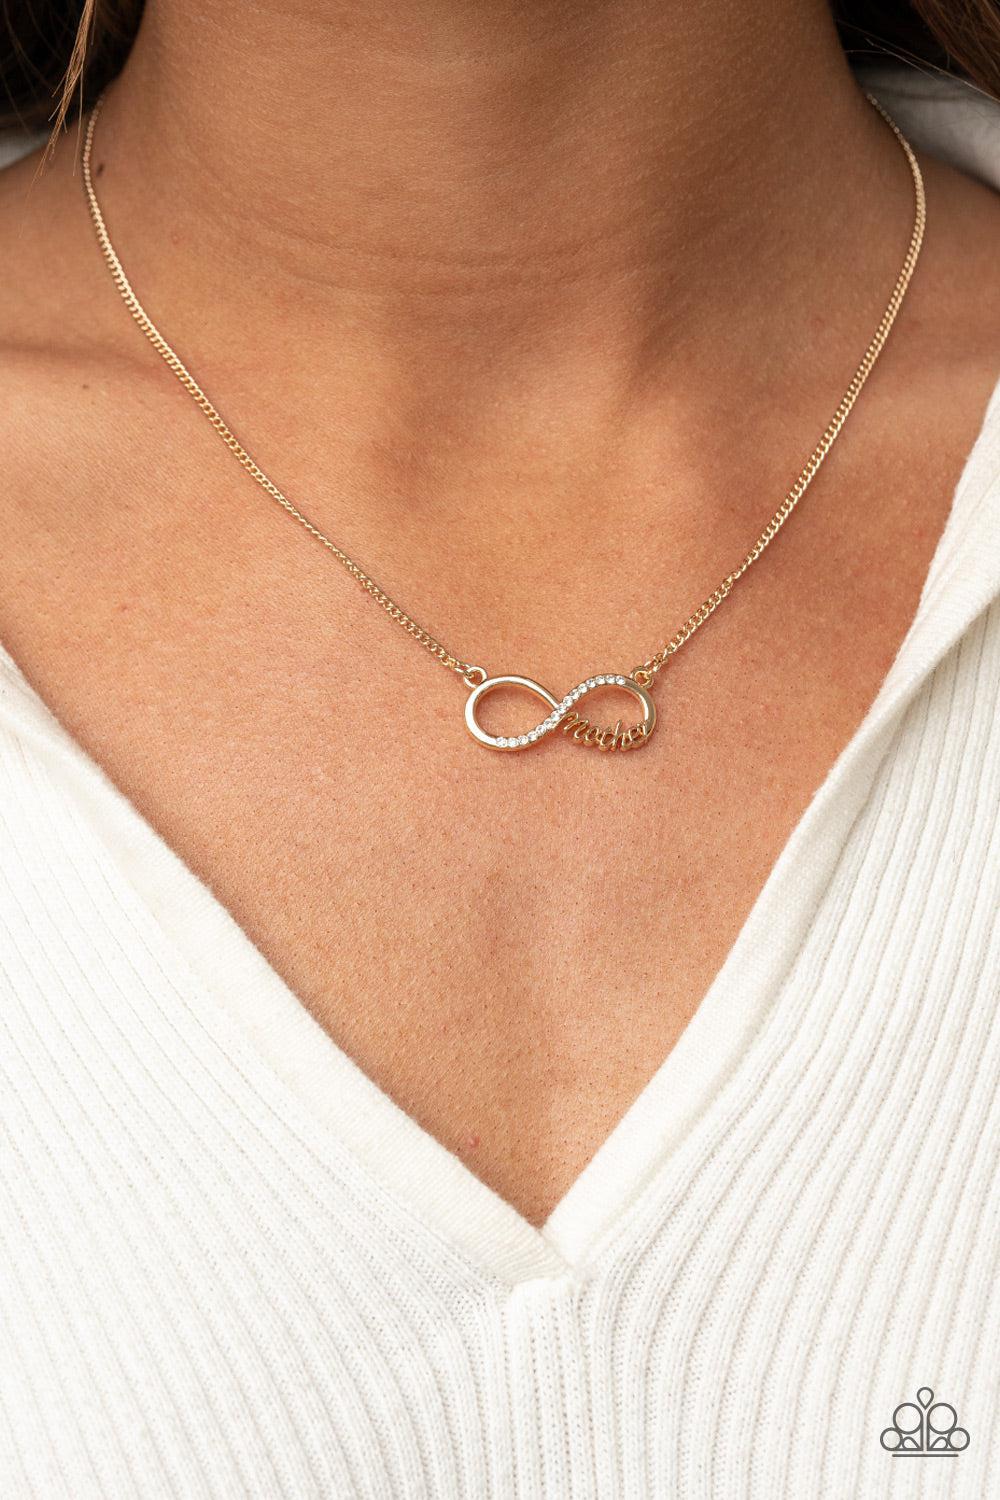 Forever Your Mom Gold Infinity Inspirational Necklace - Paparazzi Accessories- lightbox - CarasShop.com - $5 Jewelry by Cara Jewels